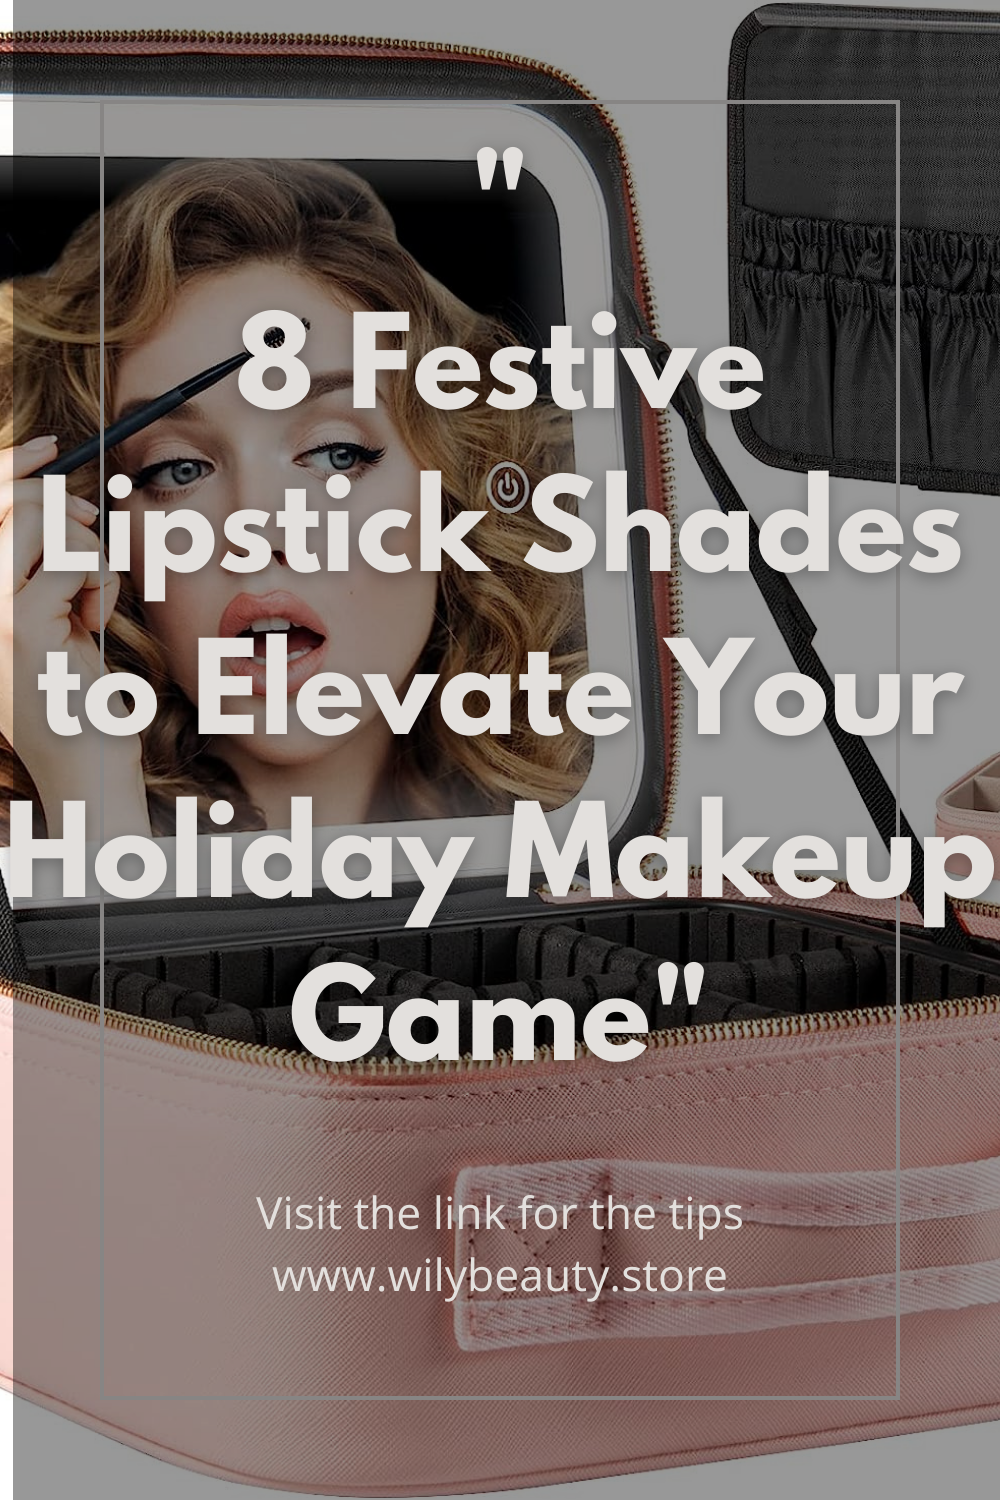 "8 Festive Lipstick Shades to Elevate Your Holiday Makeup Game"